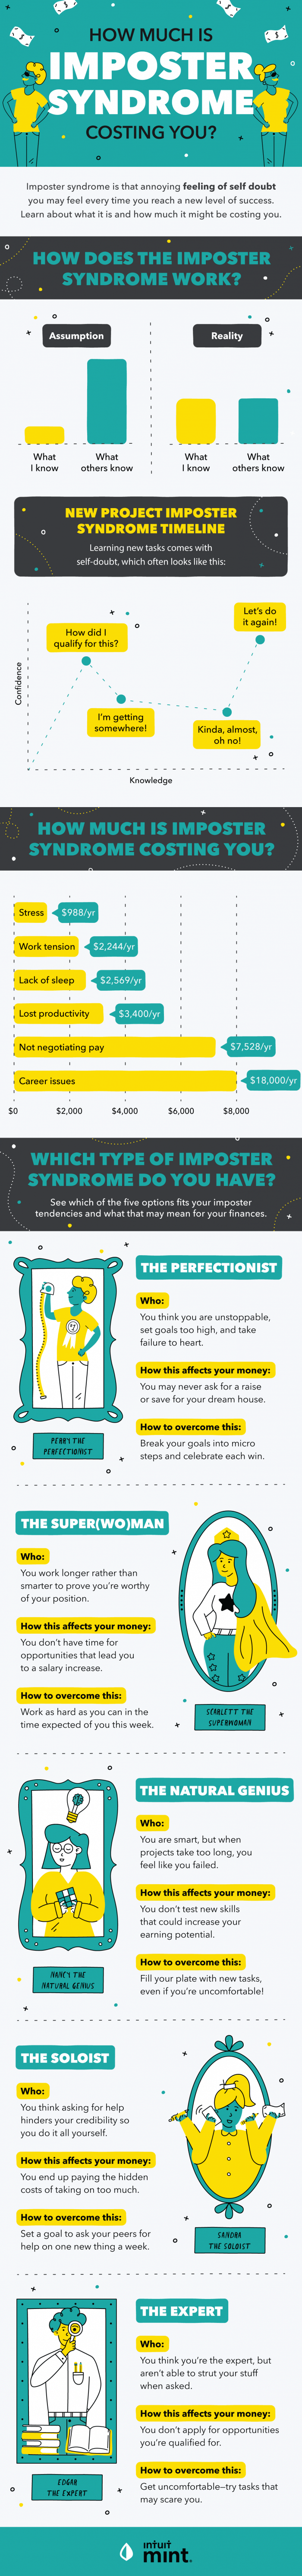 explanation of imposter syndrome and the costs of its effects